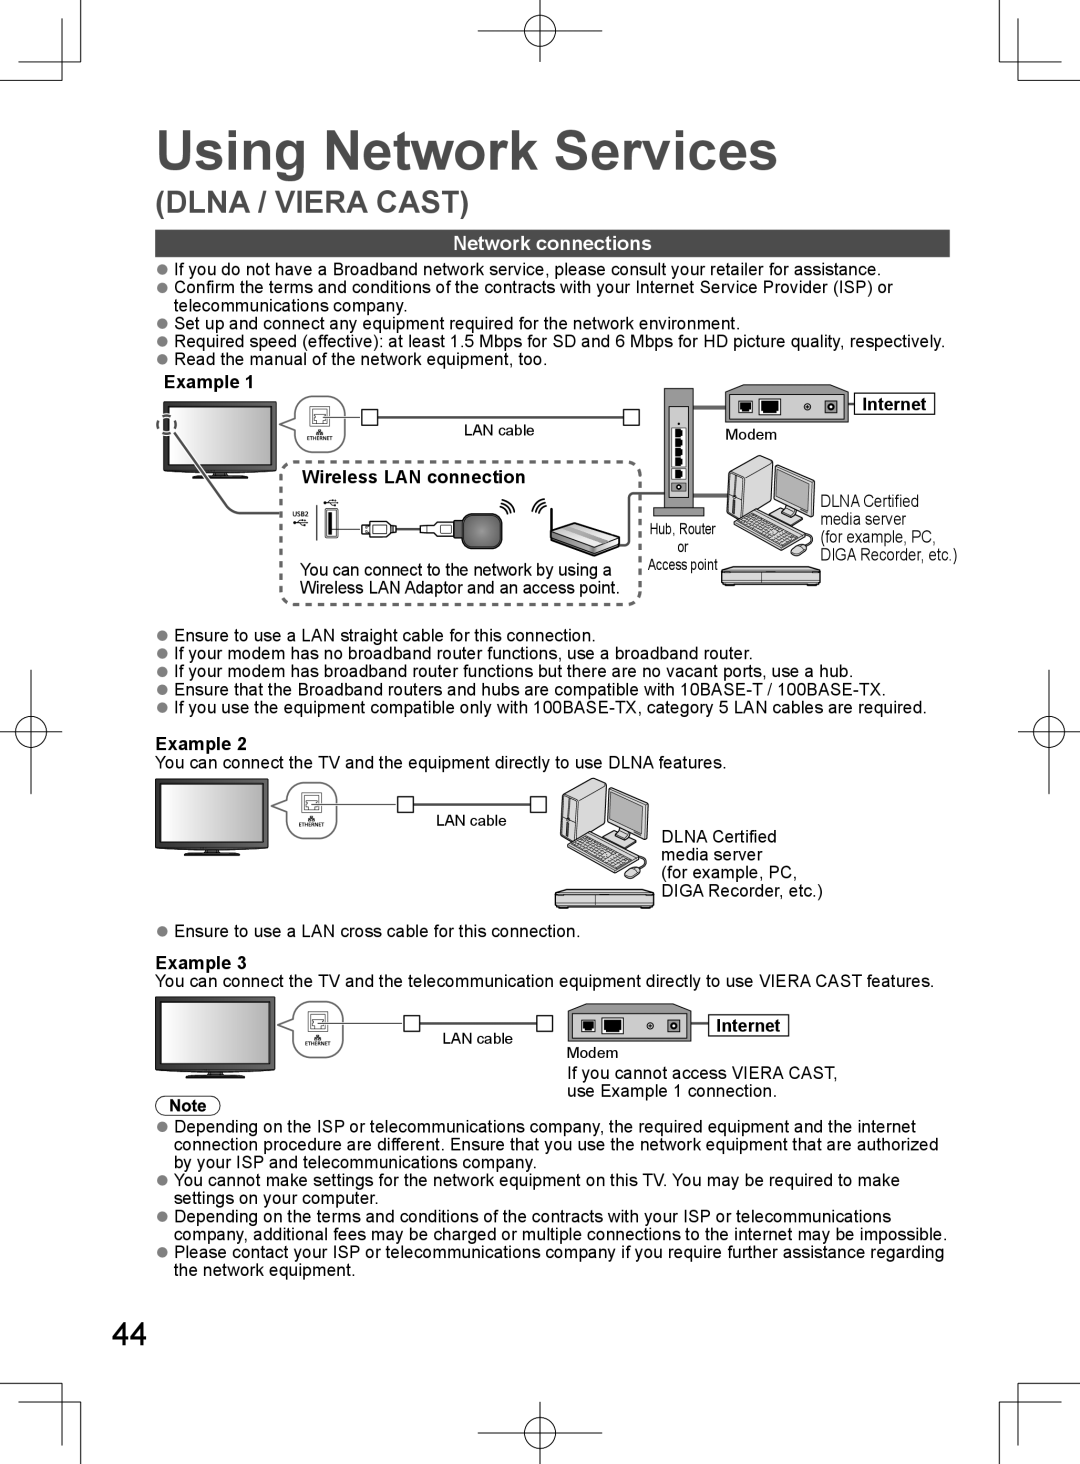 Panasonic TH-L32D25M manual Network connections, Example, Wireless LAN connection, Internet, Using Network Services 